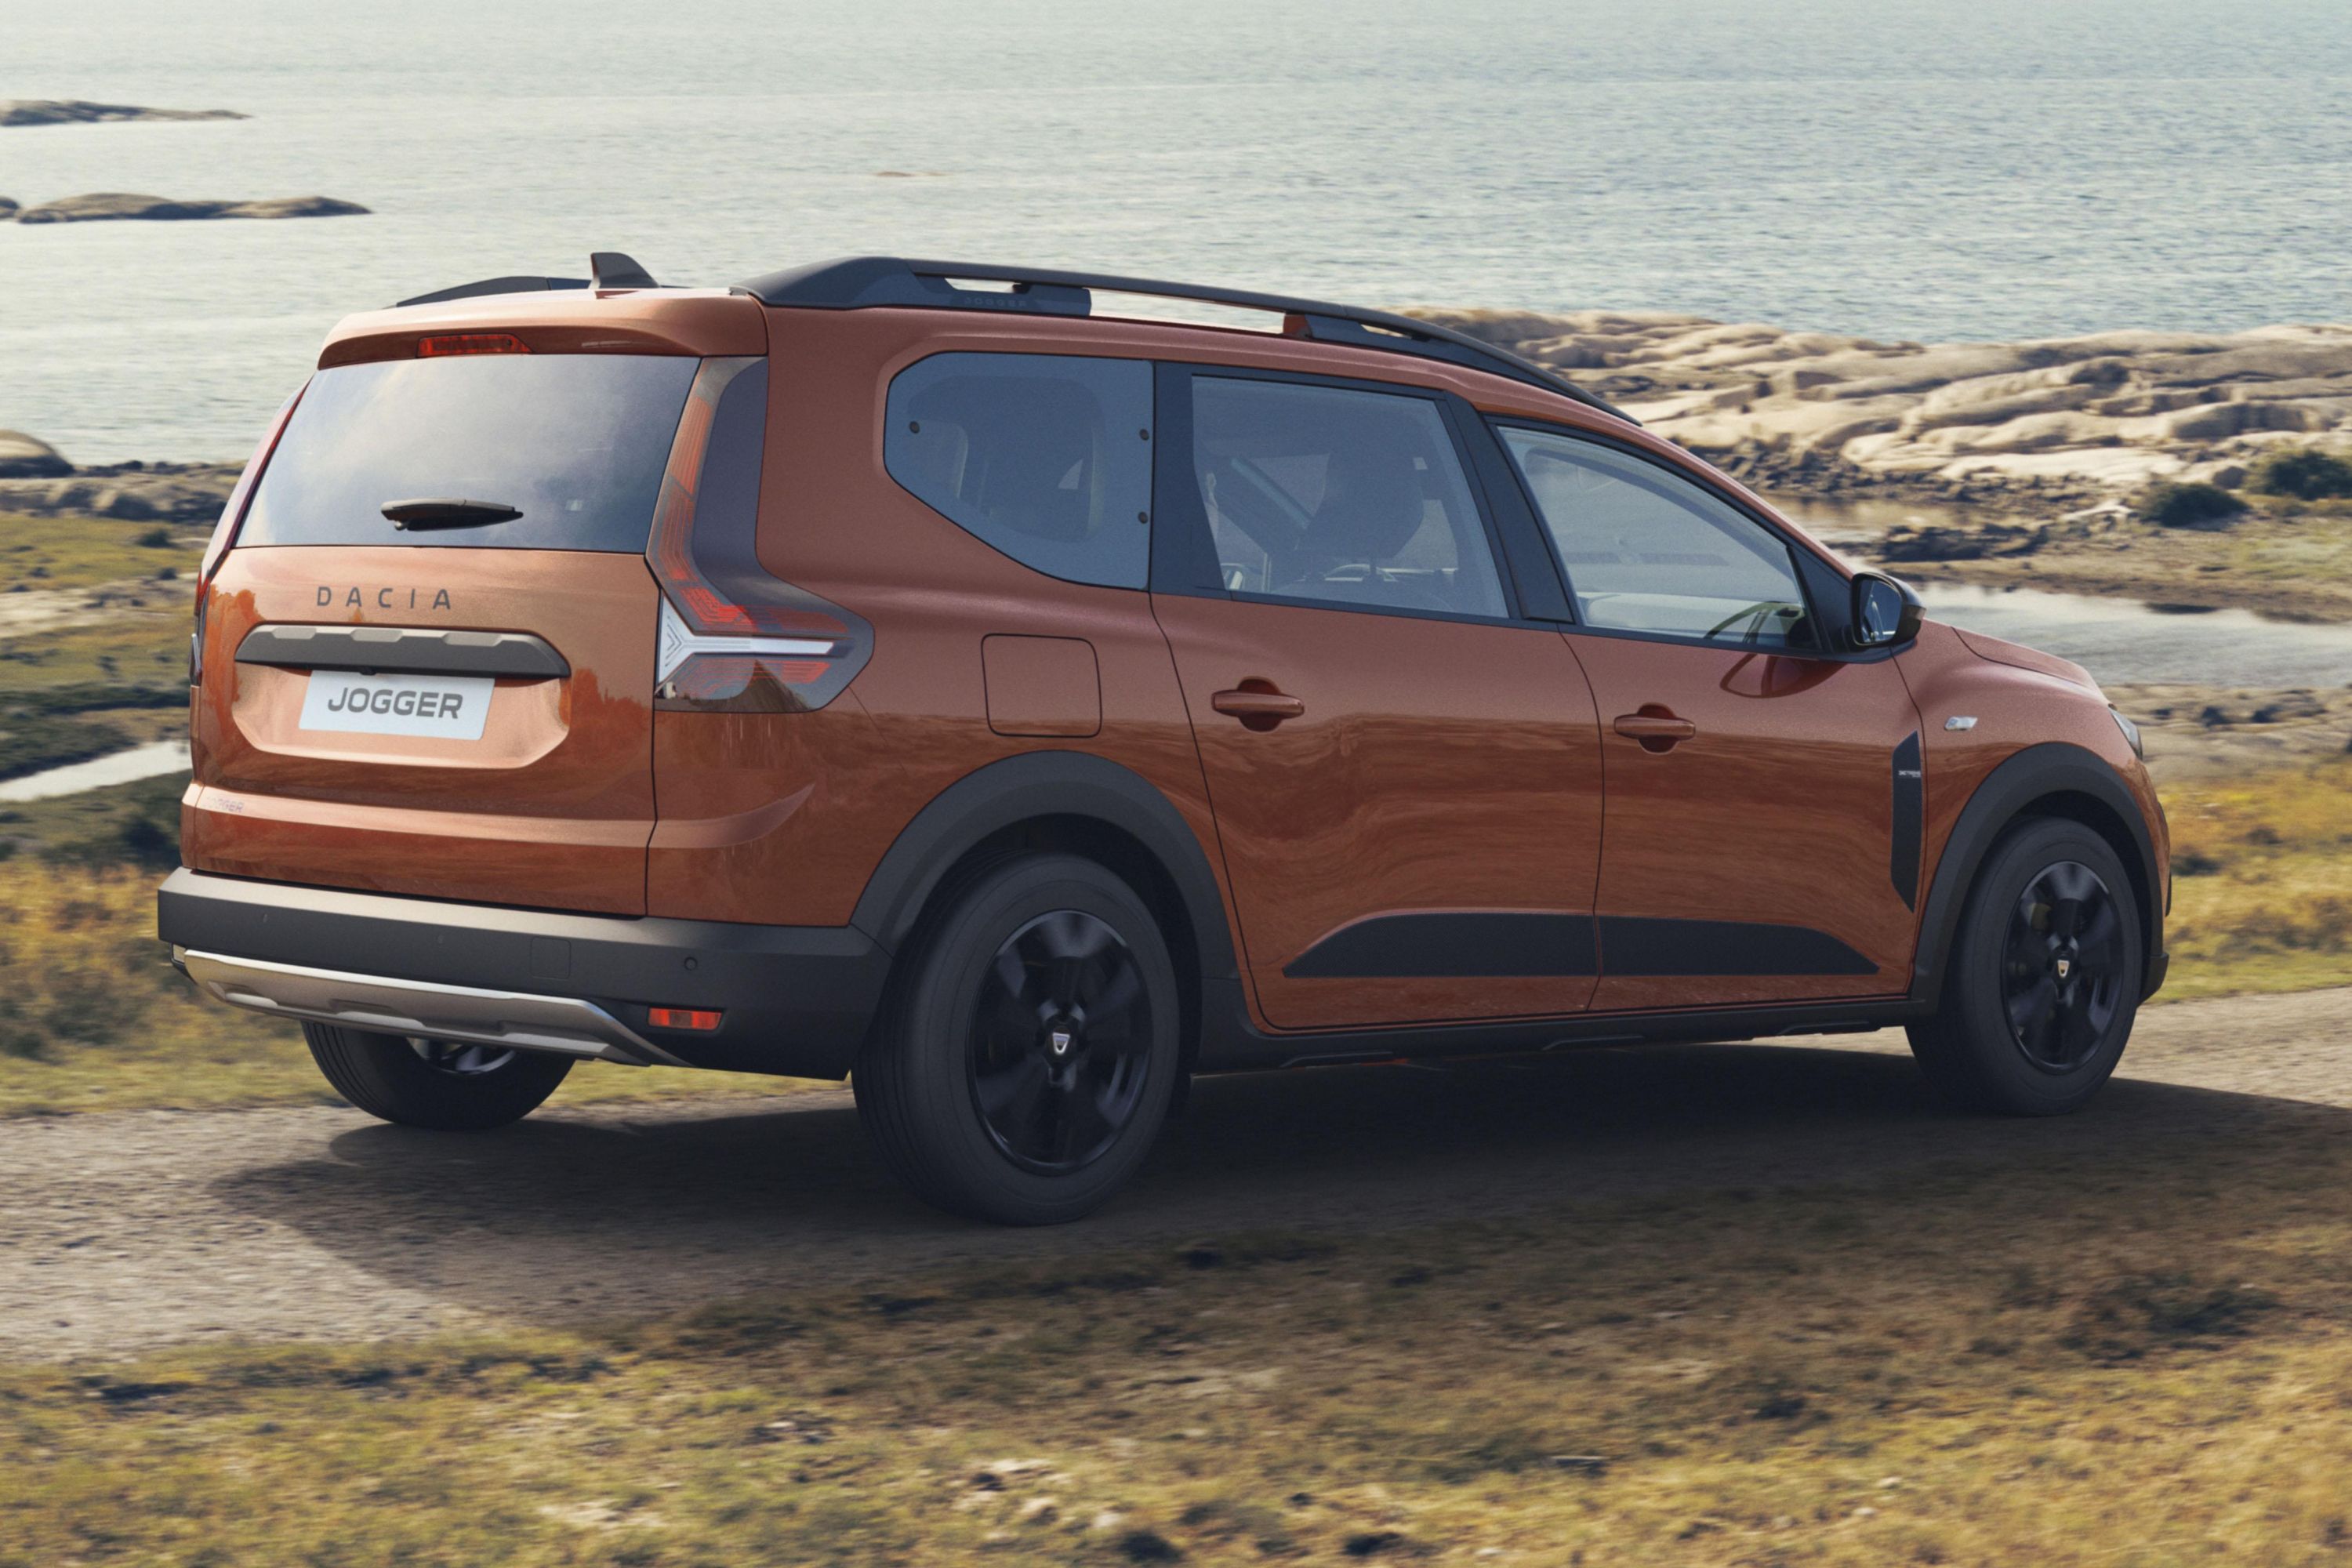 Dacia Jogger Model Vehicle Specifications - Renault Leasing